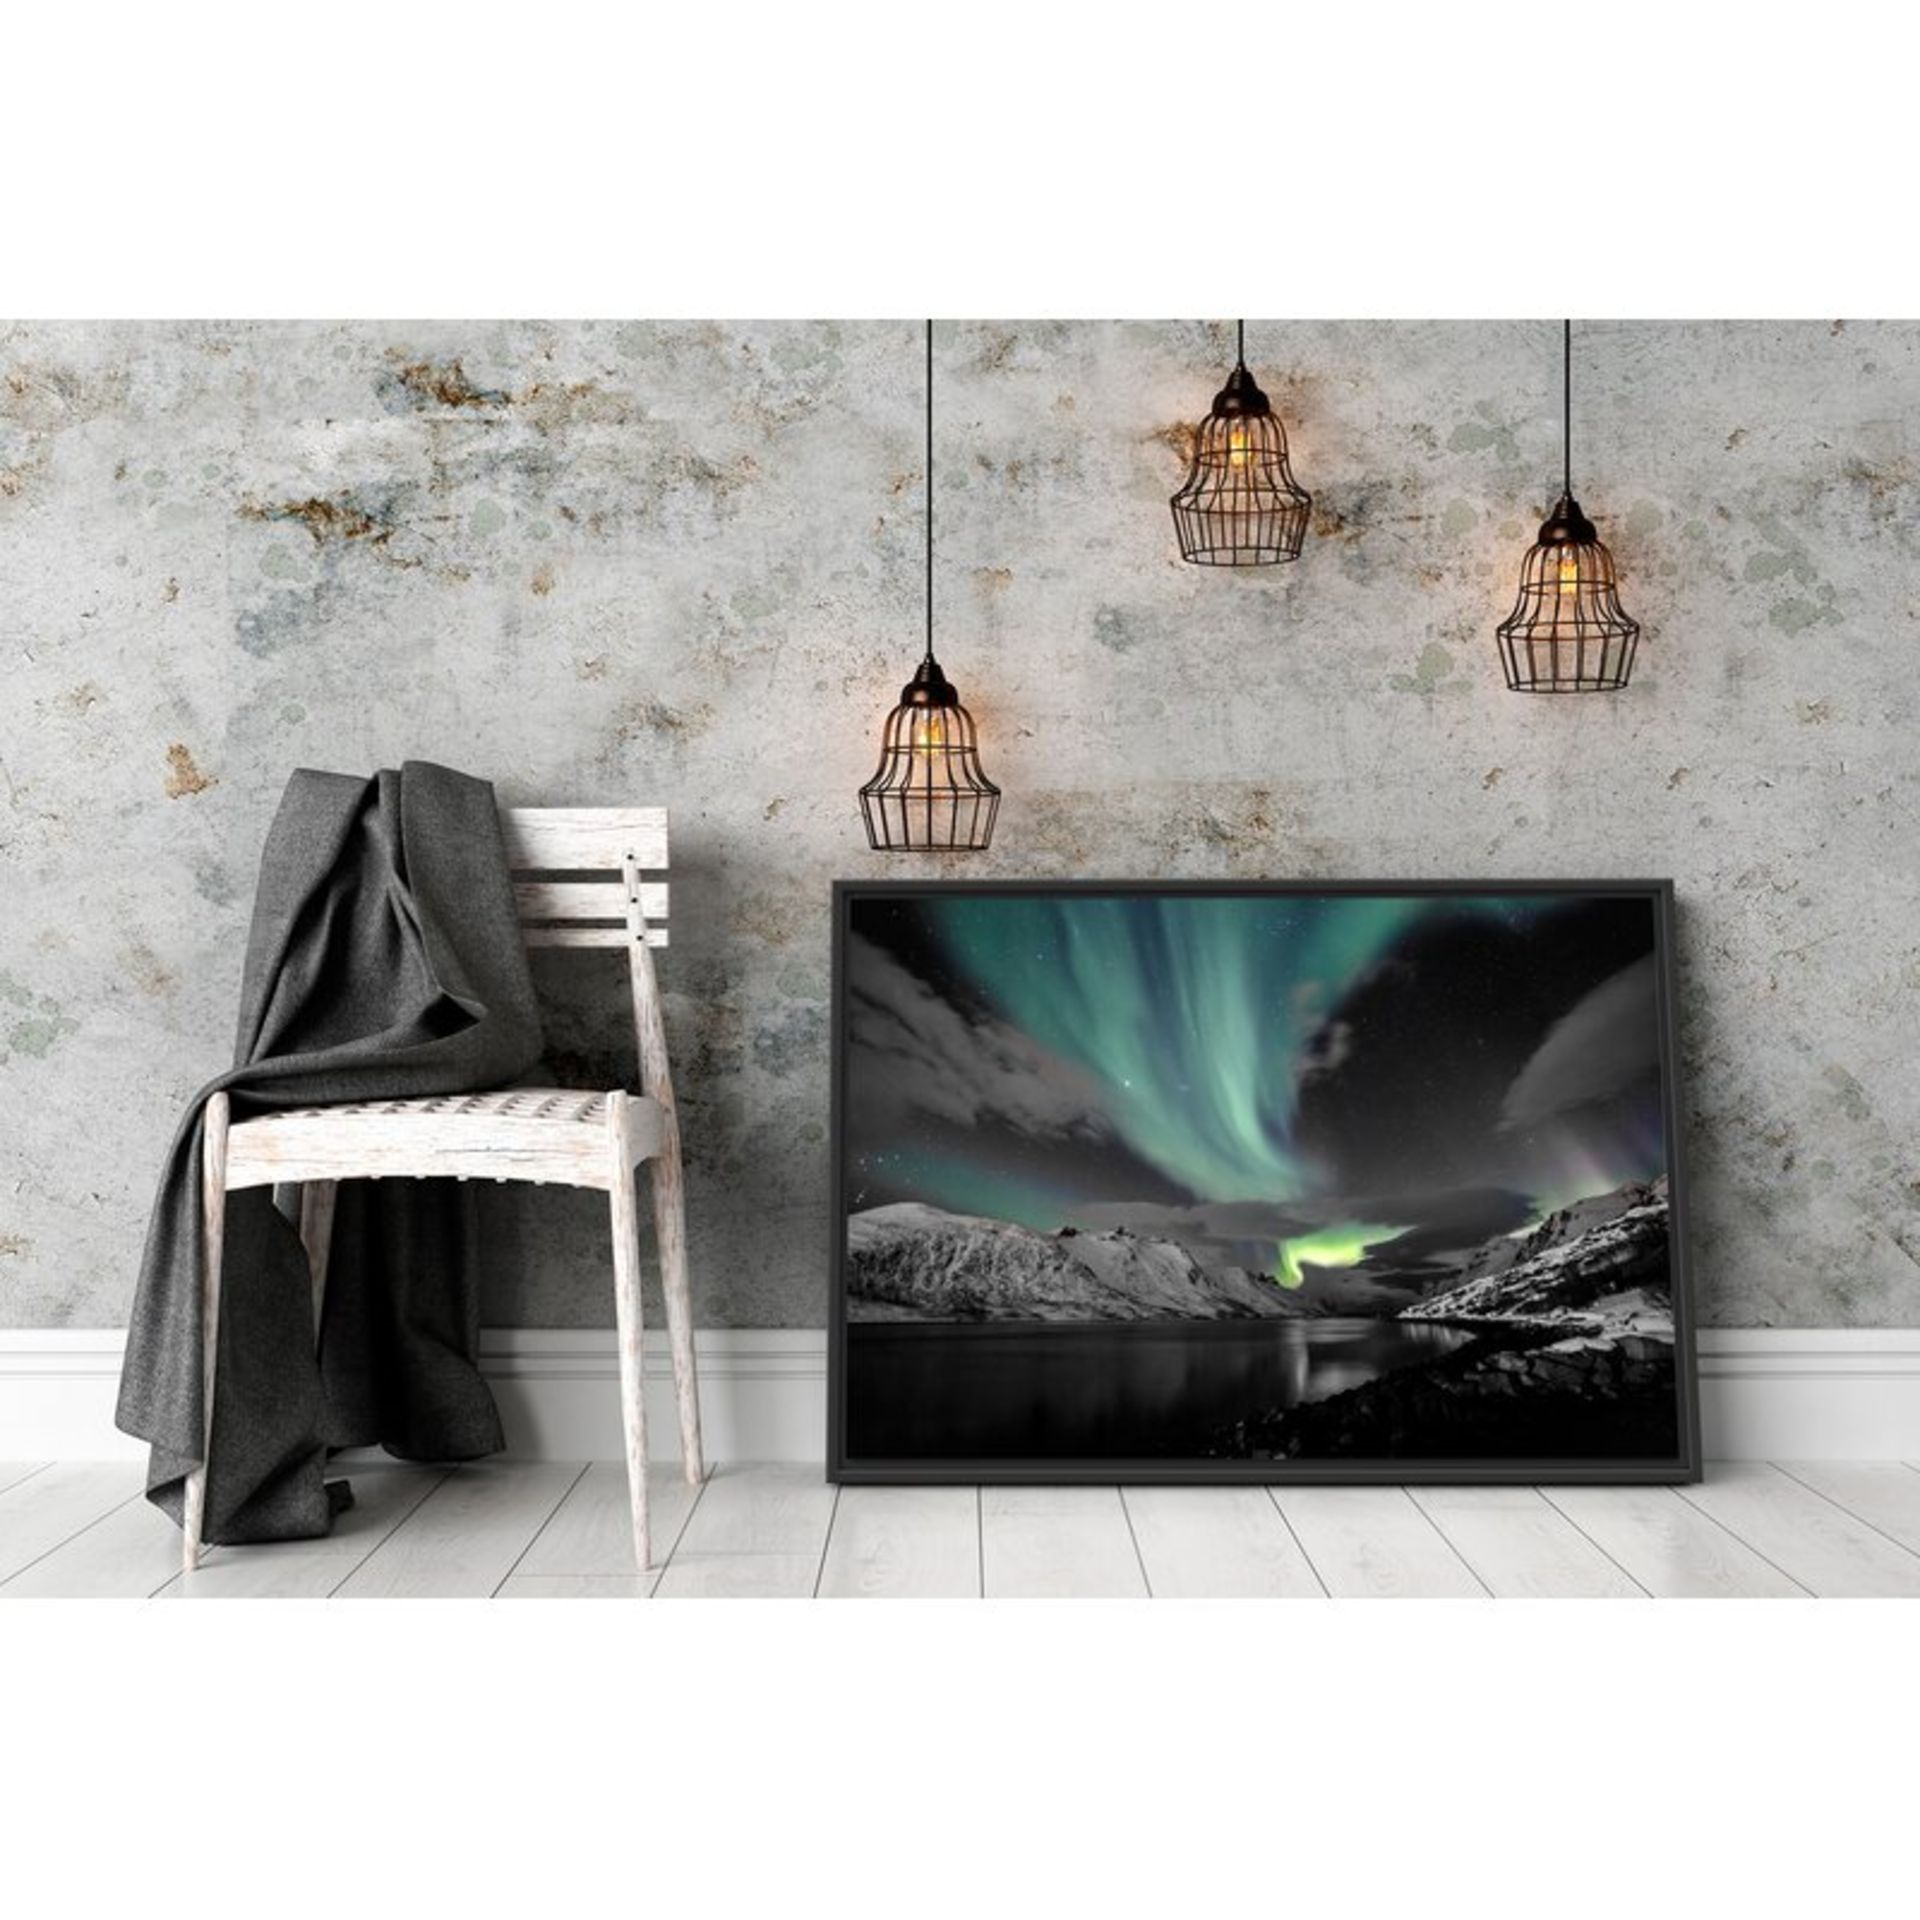 Northern Lights Over Mountains' Framed Photographic Print - RRP £64.99 - Image 2 of 2